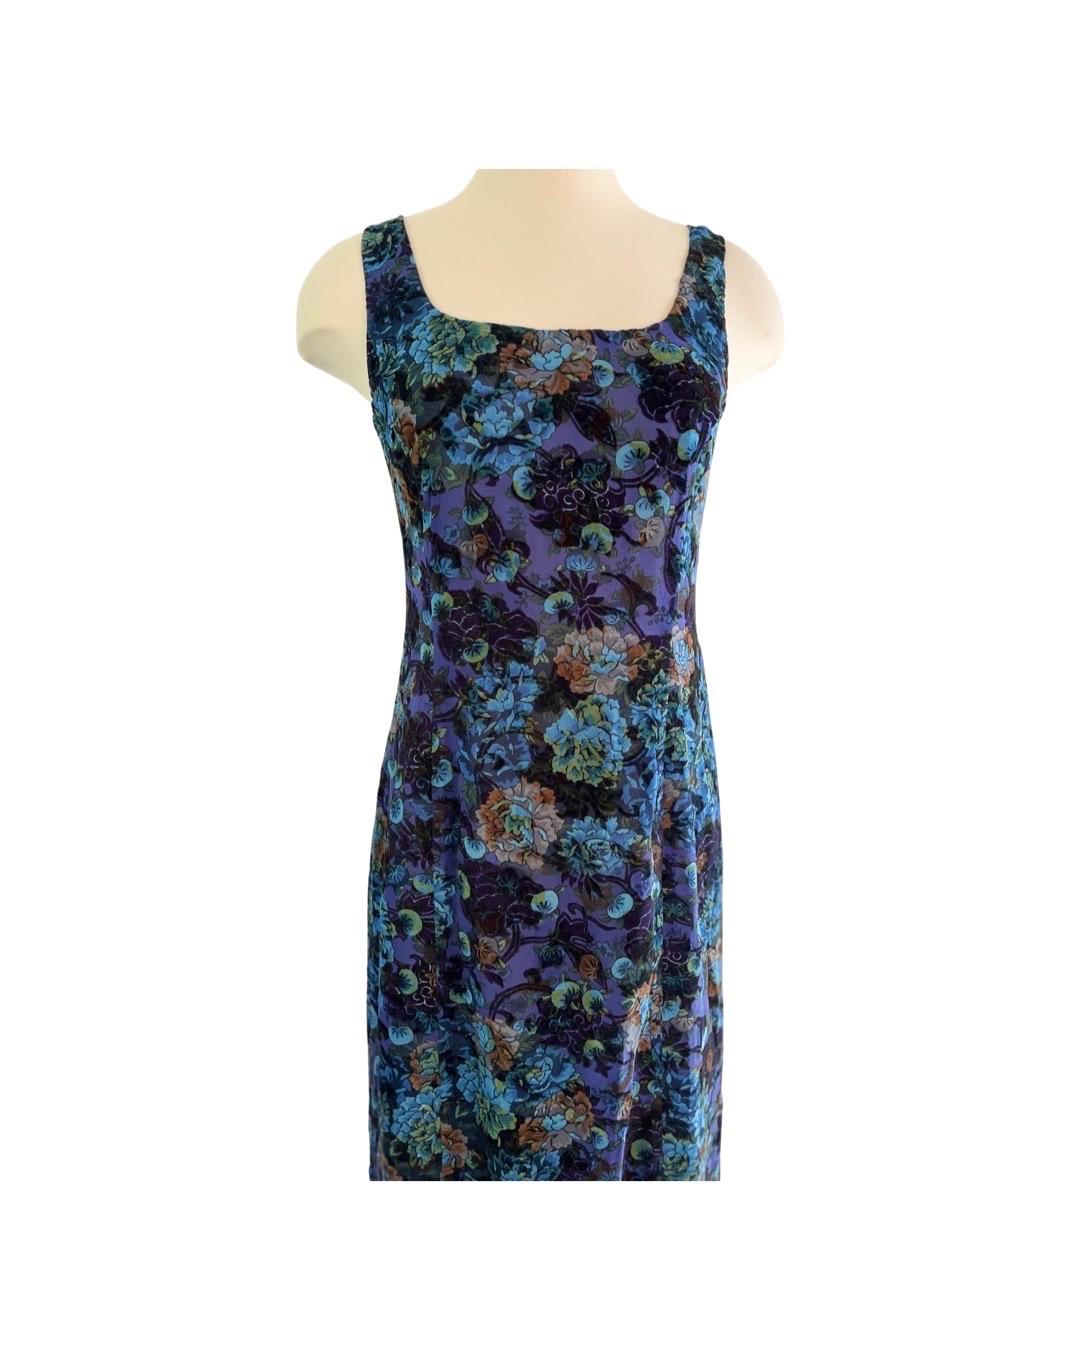 Wonderful Kenzo 90s silhouette dress in a deep blue velvet burnout silk with blueberry bushes for the print. Thick straps and round neckline with a zipper closure. Fully lined with a matching blue slip. Excellent condition.

Shoulder 14
Chest